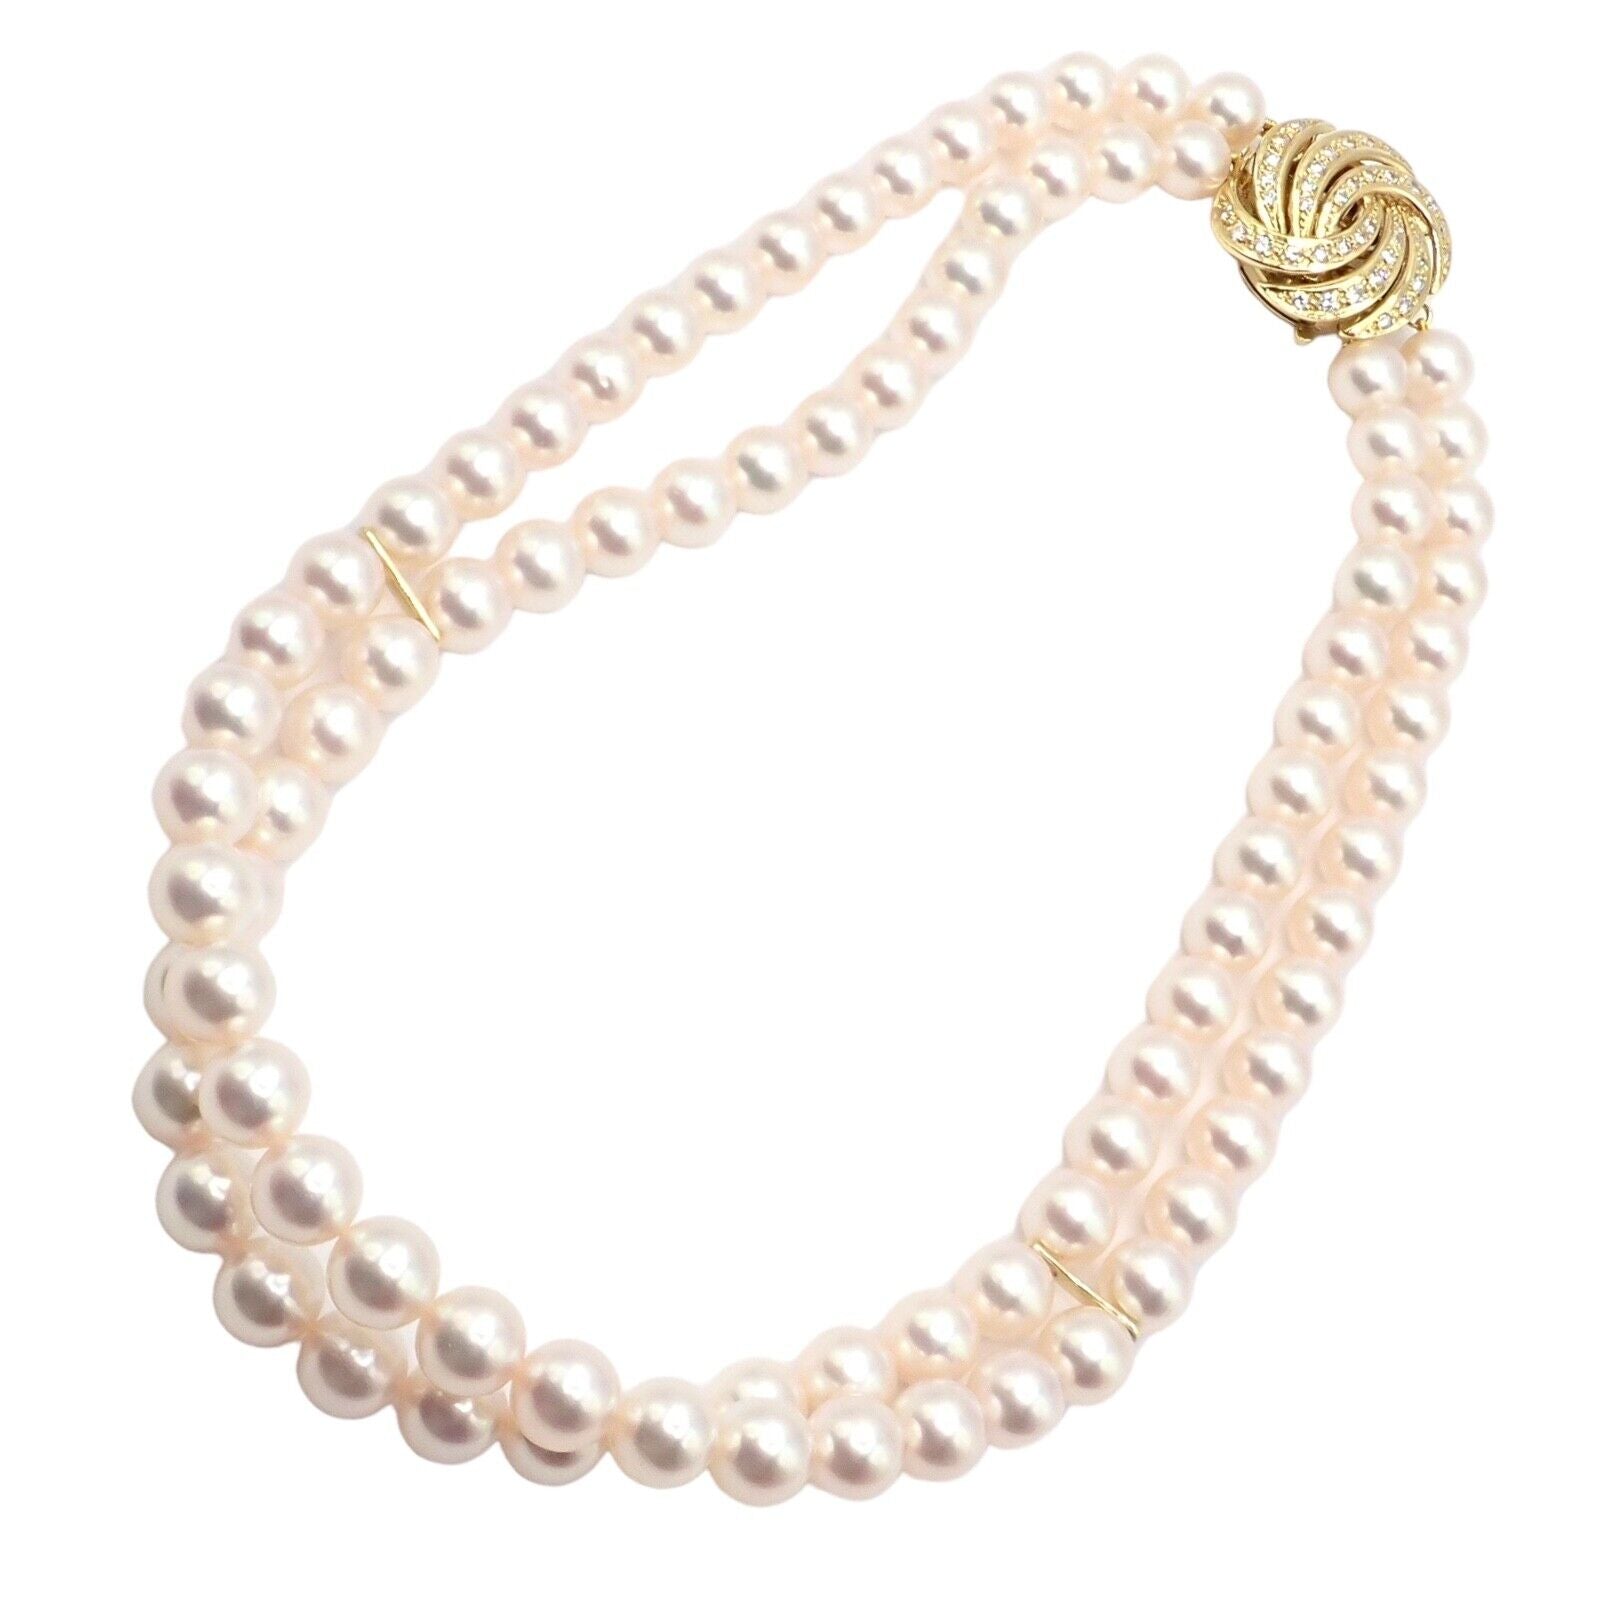 Mikimoto Jewelry & Watches:Fine Jewelry:Necklaces & Pendants Authentic! Mikimoto 18k Yellow Gold Diamond Double Strand 8mm Pearl Necklace